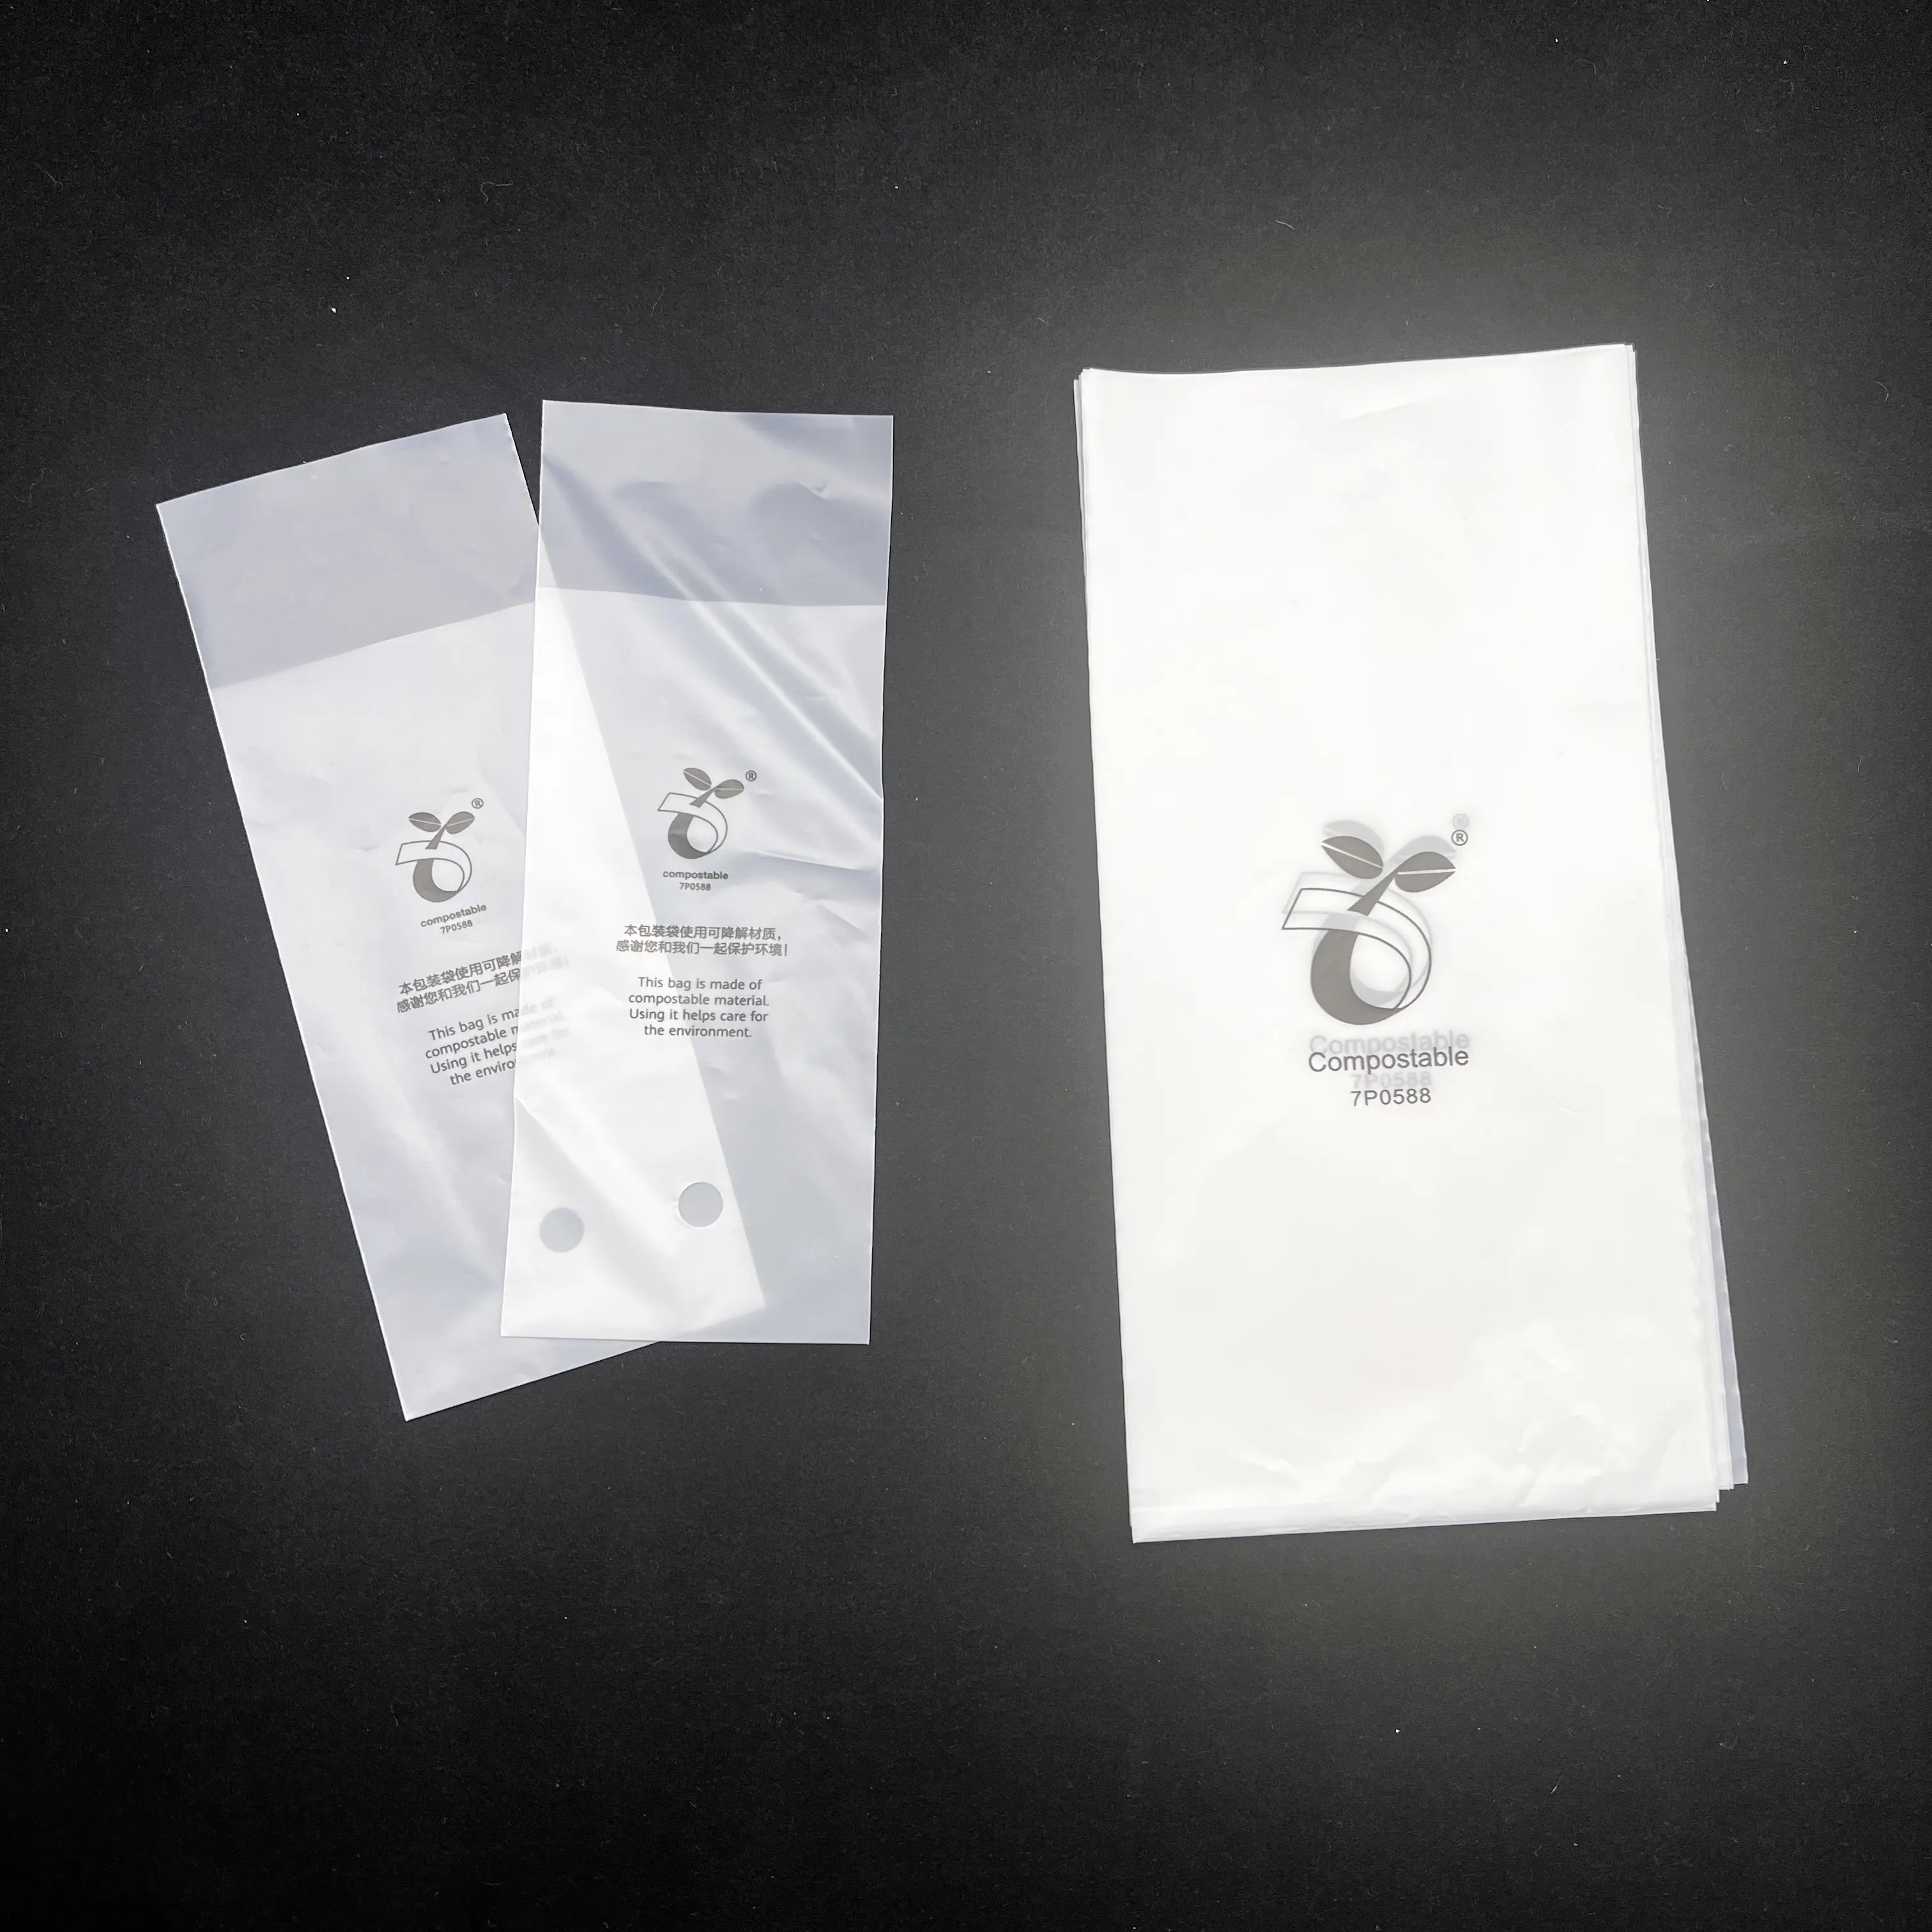 Frosted translucent degradable bags PLA corn starch biodegradable self-adhesive bags Compost biological packaging bags